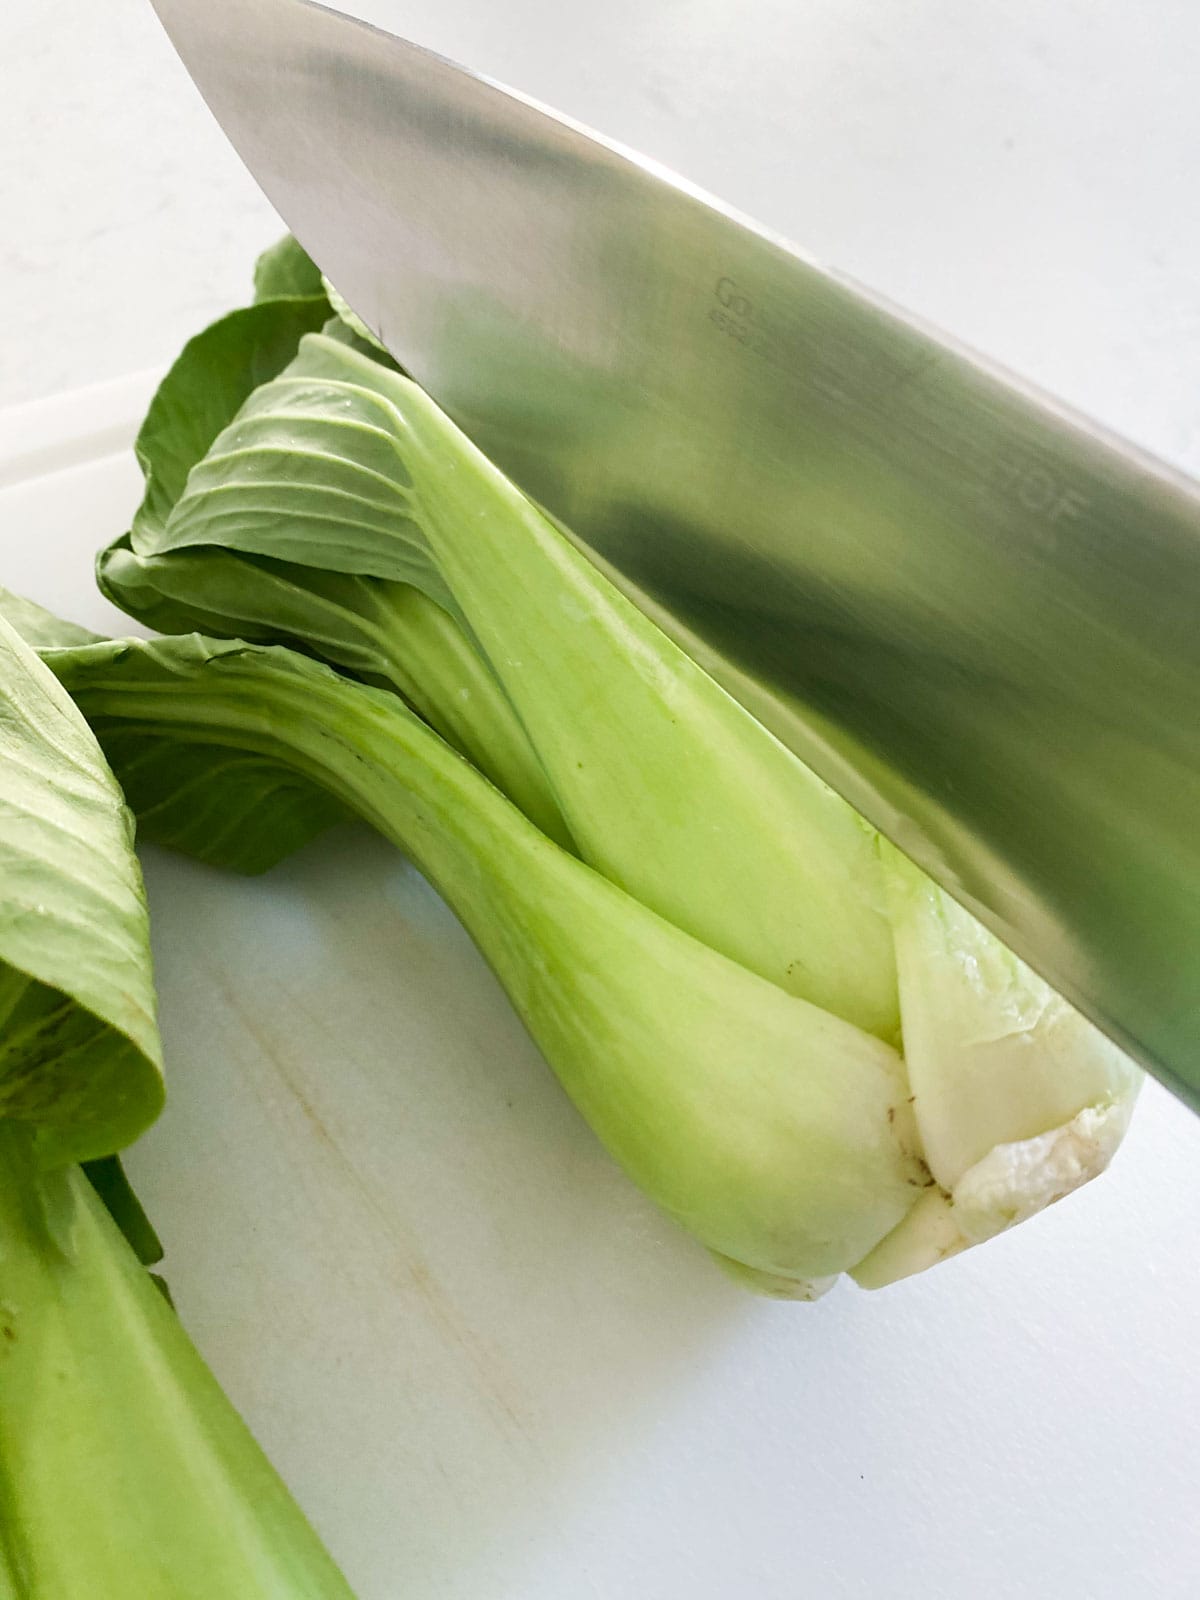 Slicing bok choy with a knife.